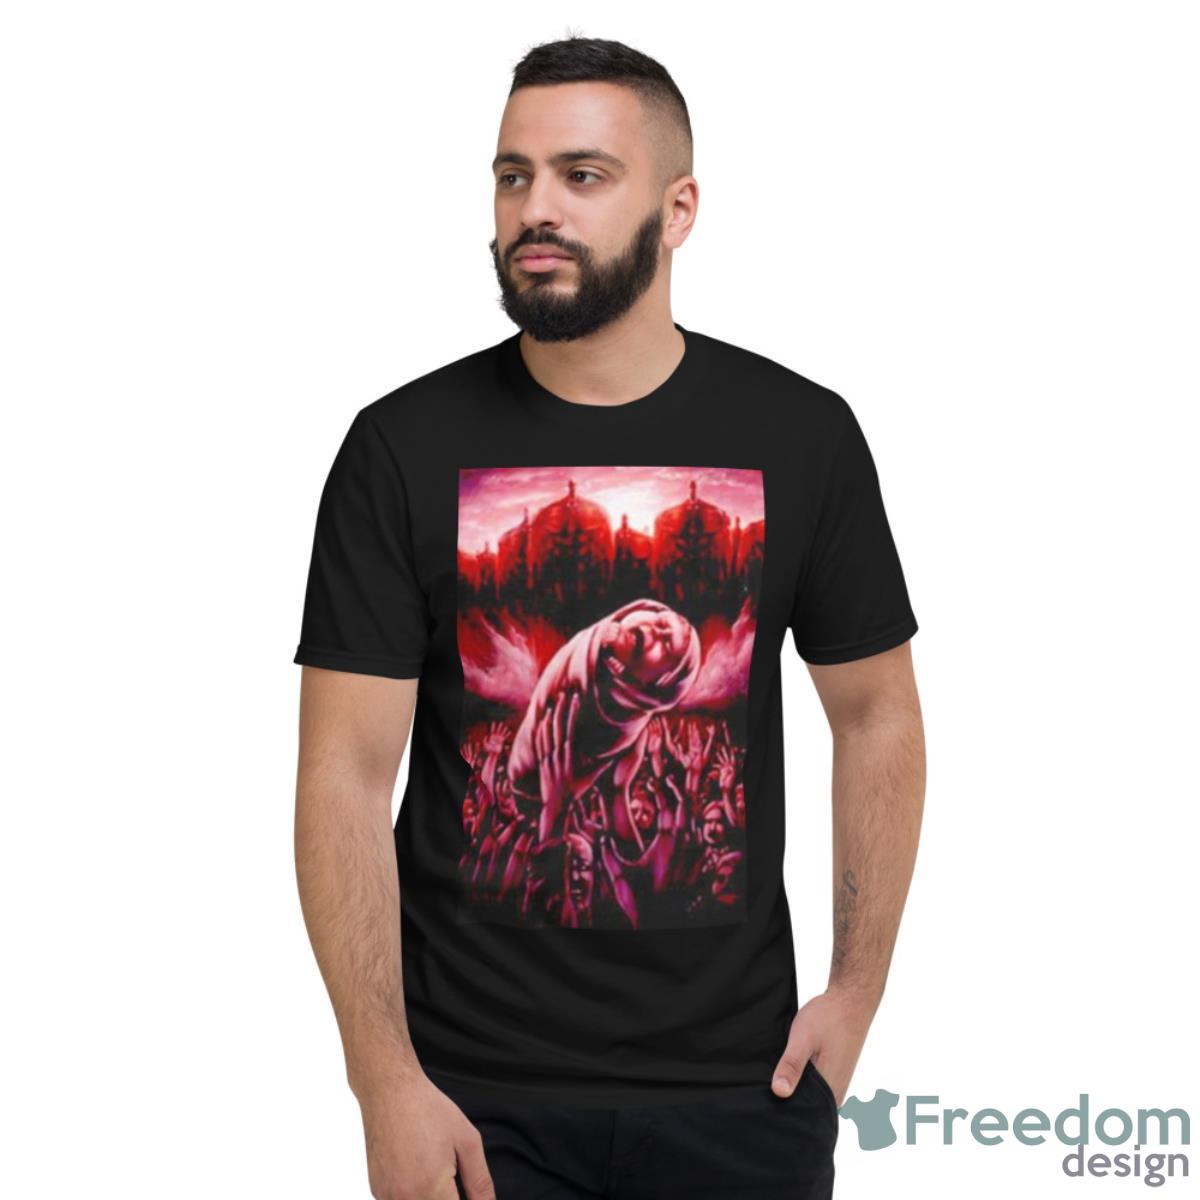 The rumbling attack on titan chapter 134 shirt